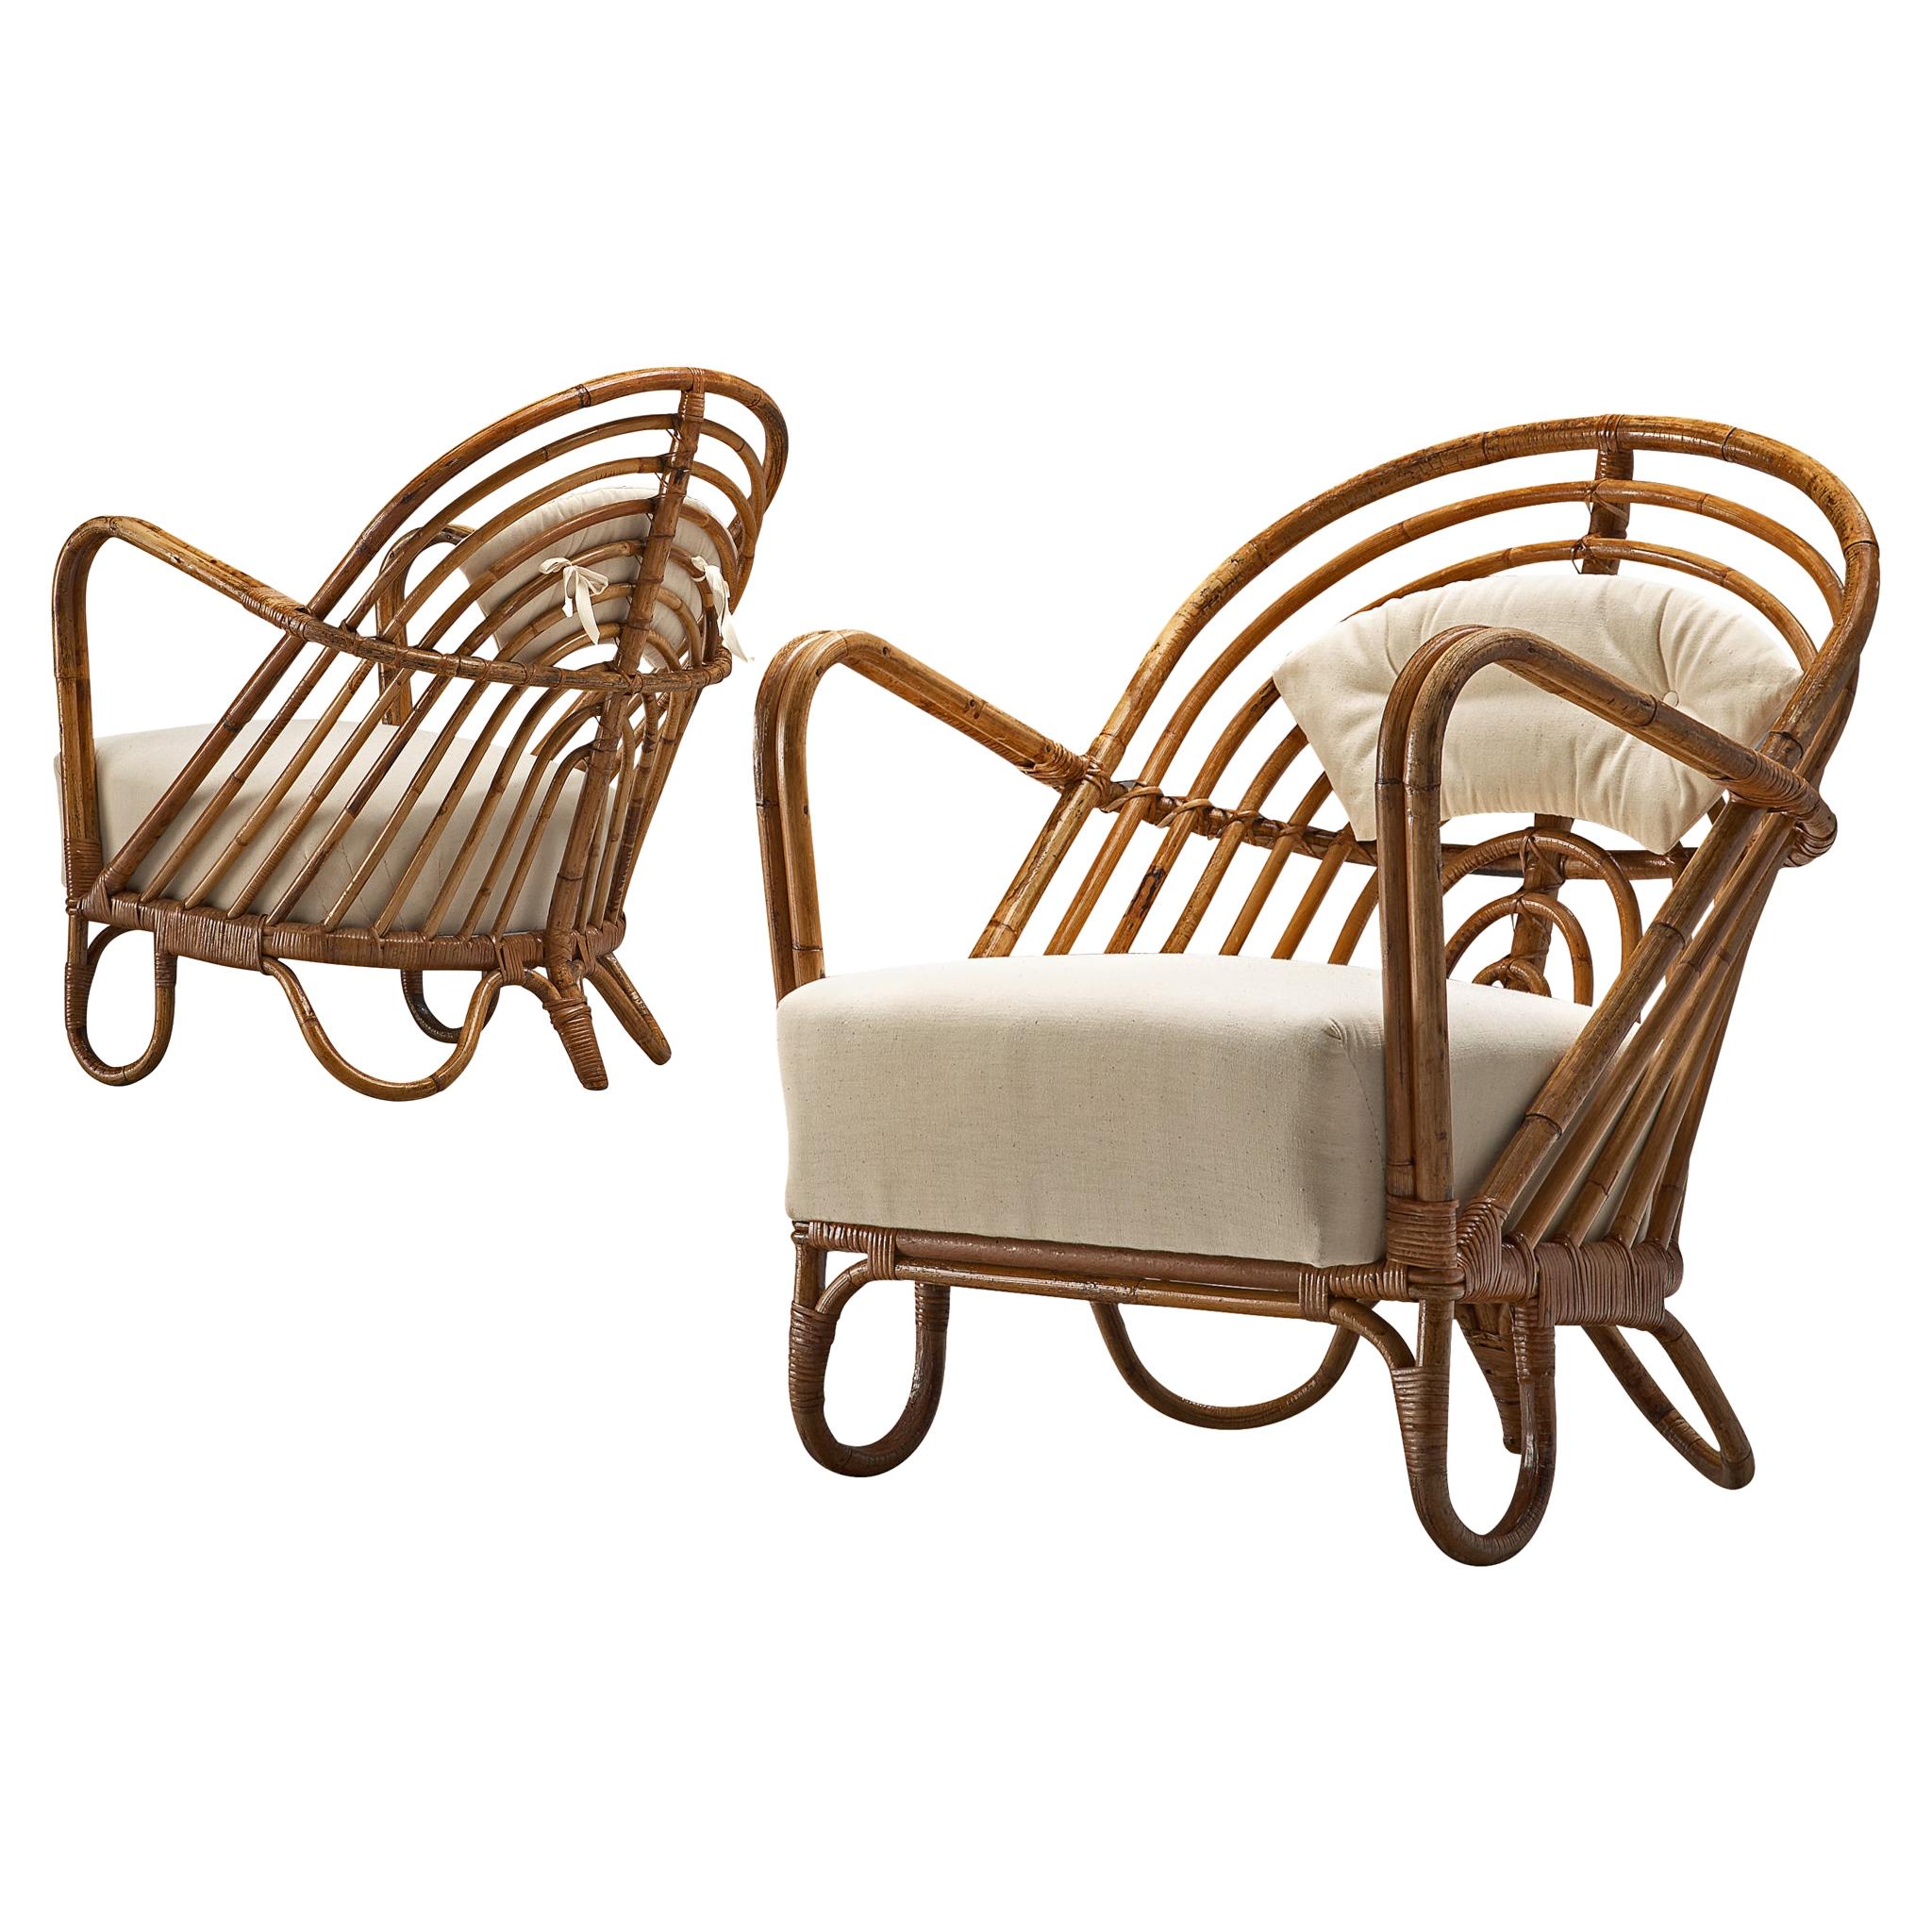 Pair of Wicker Lounge Chairs, Denmark, 1940s